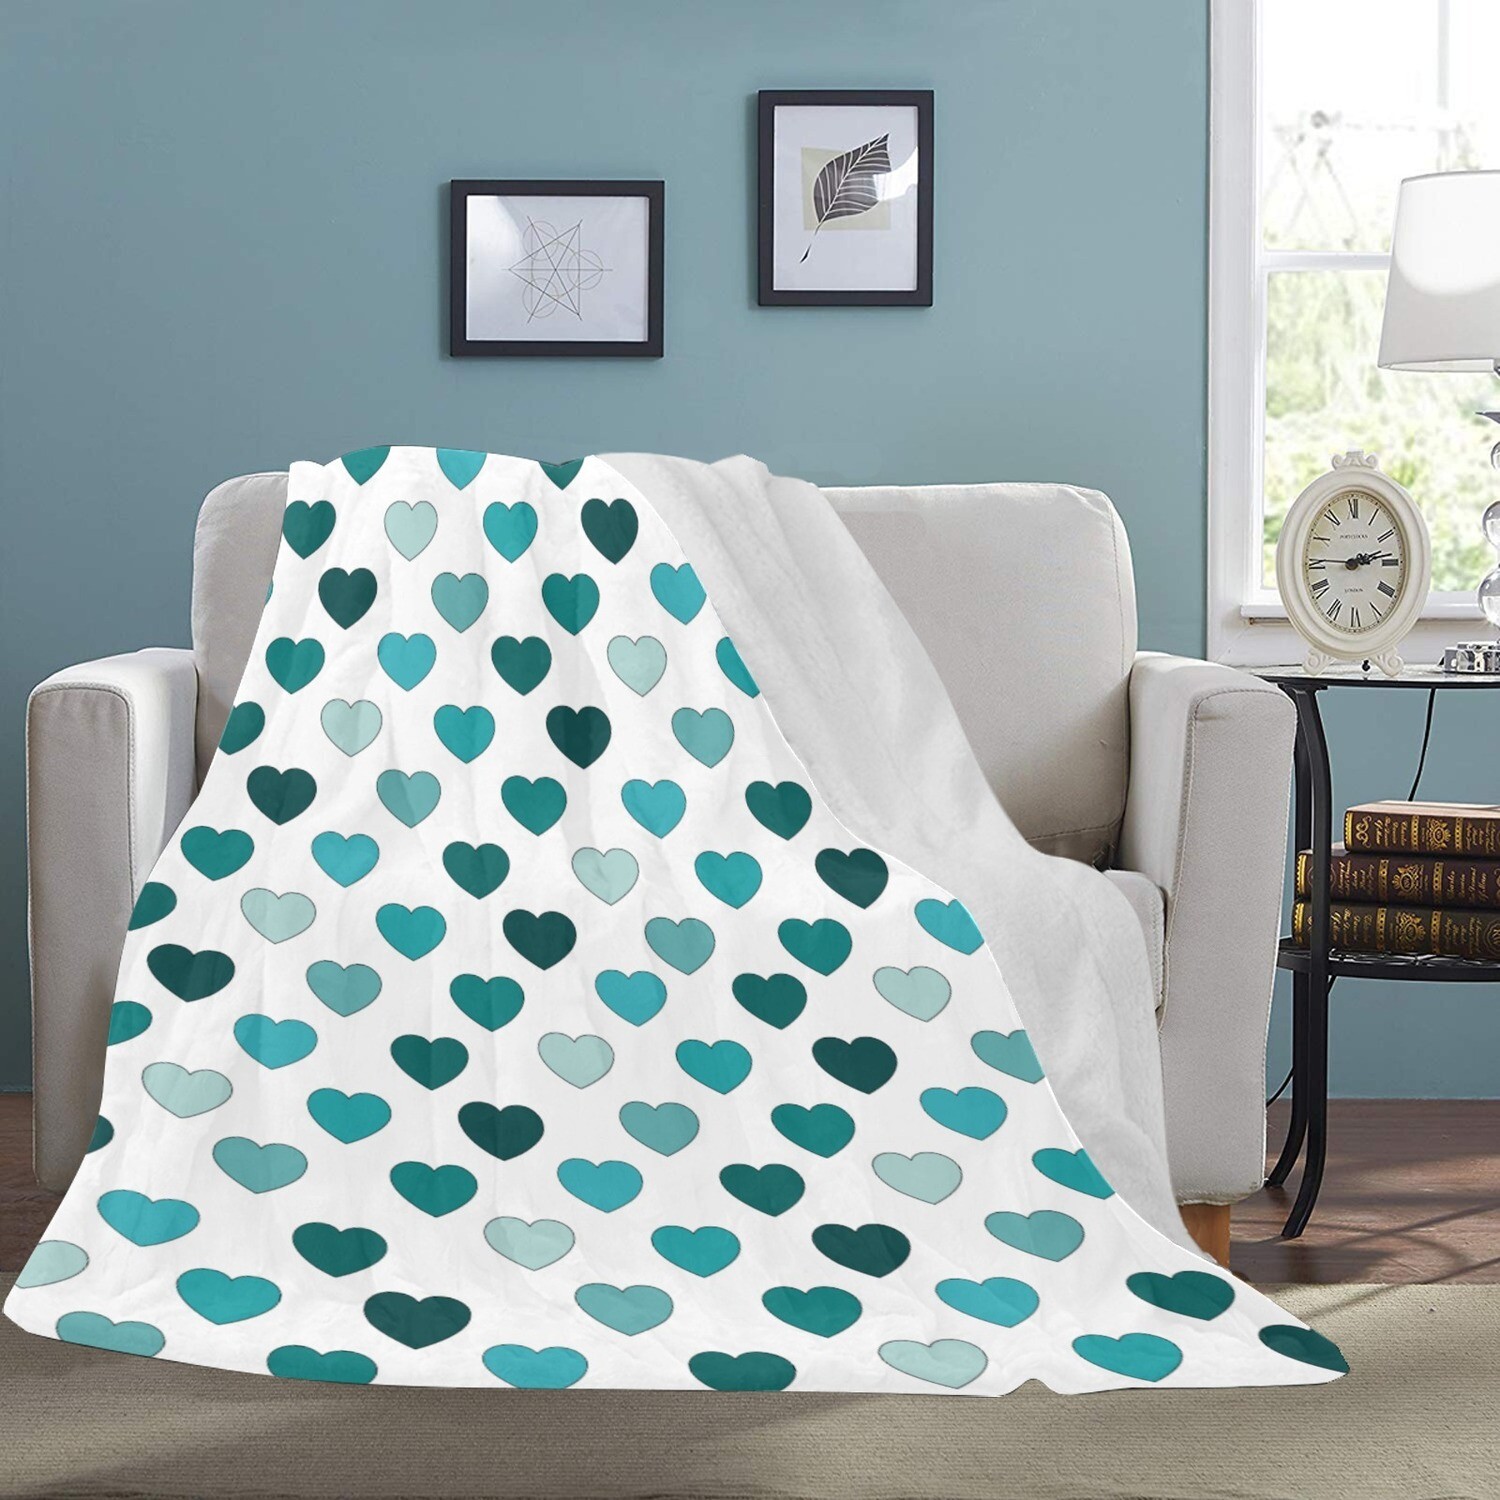 🤴🏽👸🏽💕Large Ultra-Soft Micro Fleece Blanket Shades of teal Hearts, gift, gift for her, gift for him, gift for them, 70"x80", white